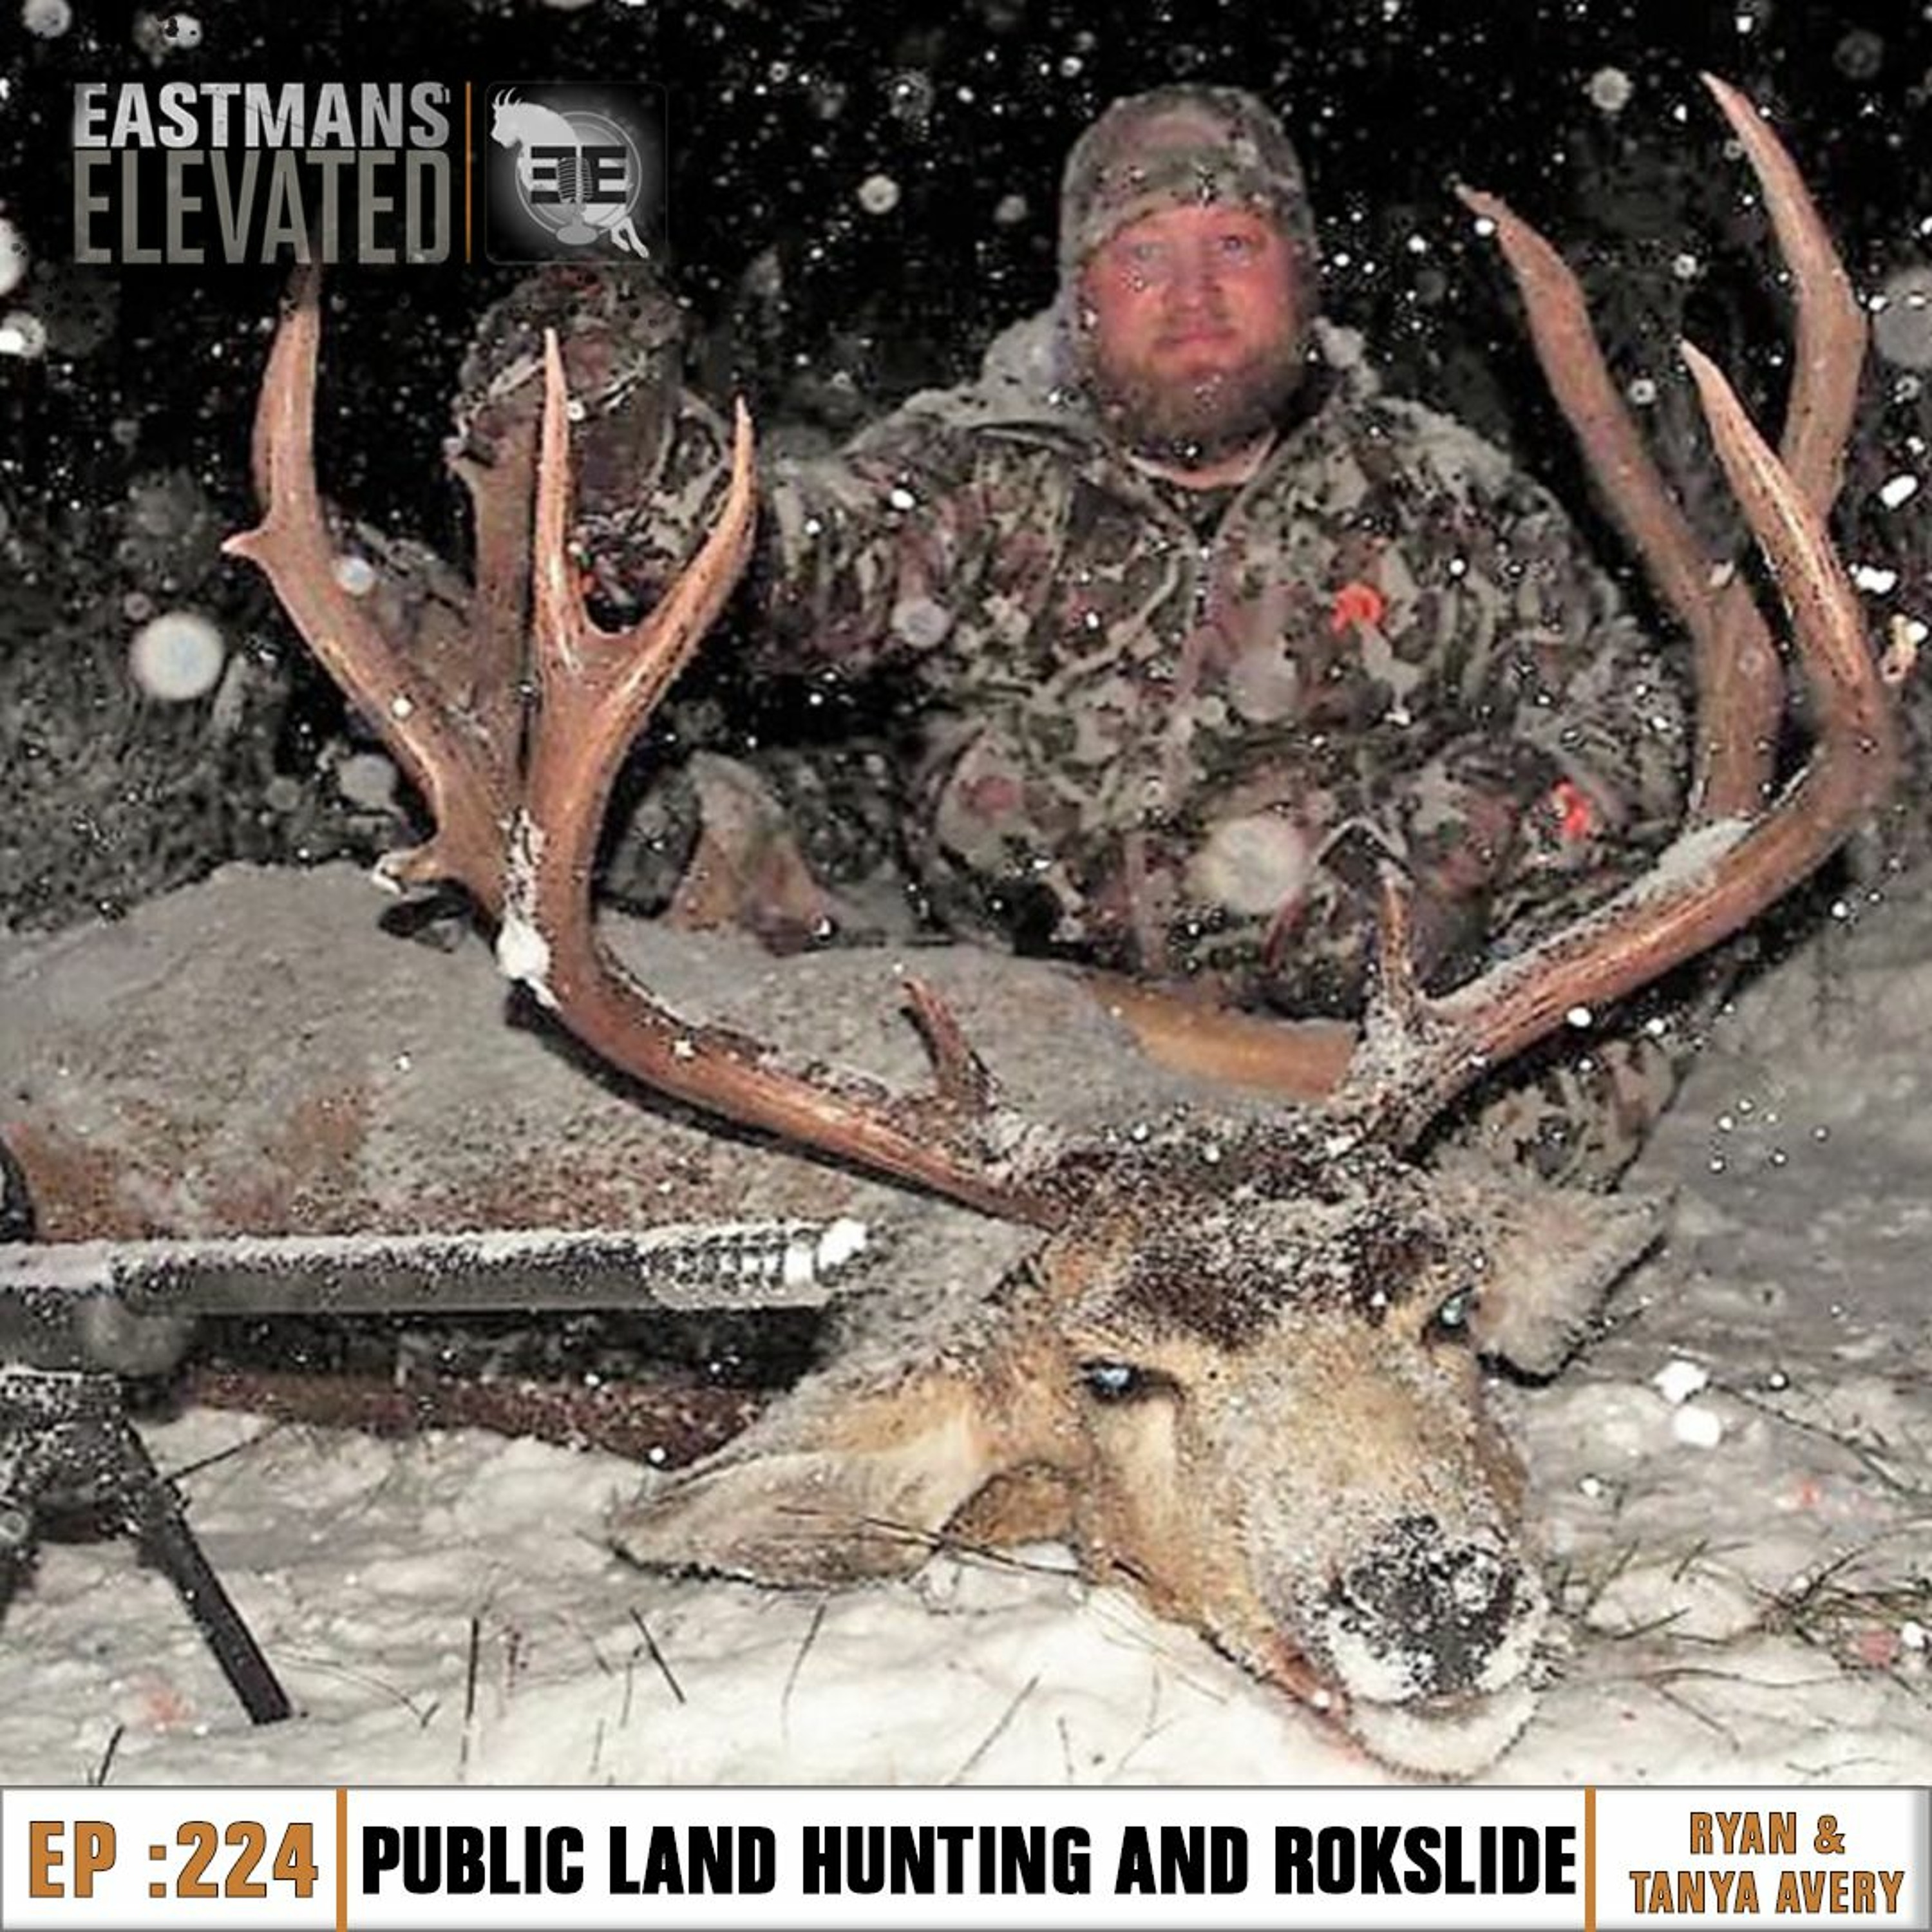 Episode 224: Public Land Hunting and Rokslide with Ryan and Tanya Avery